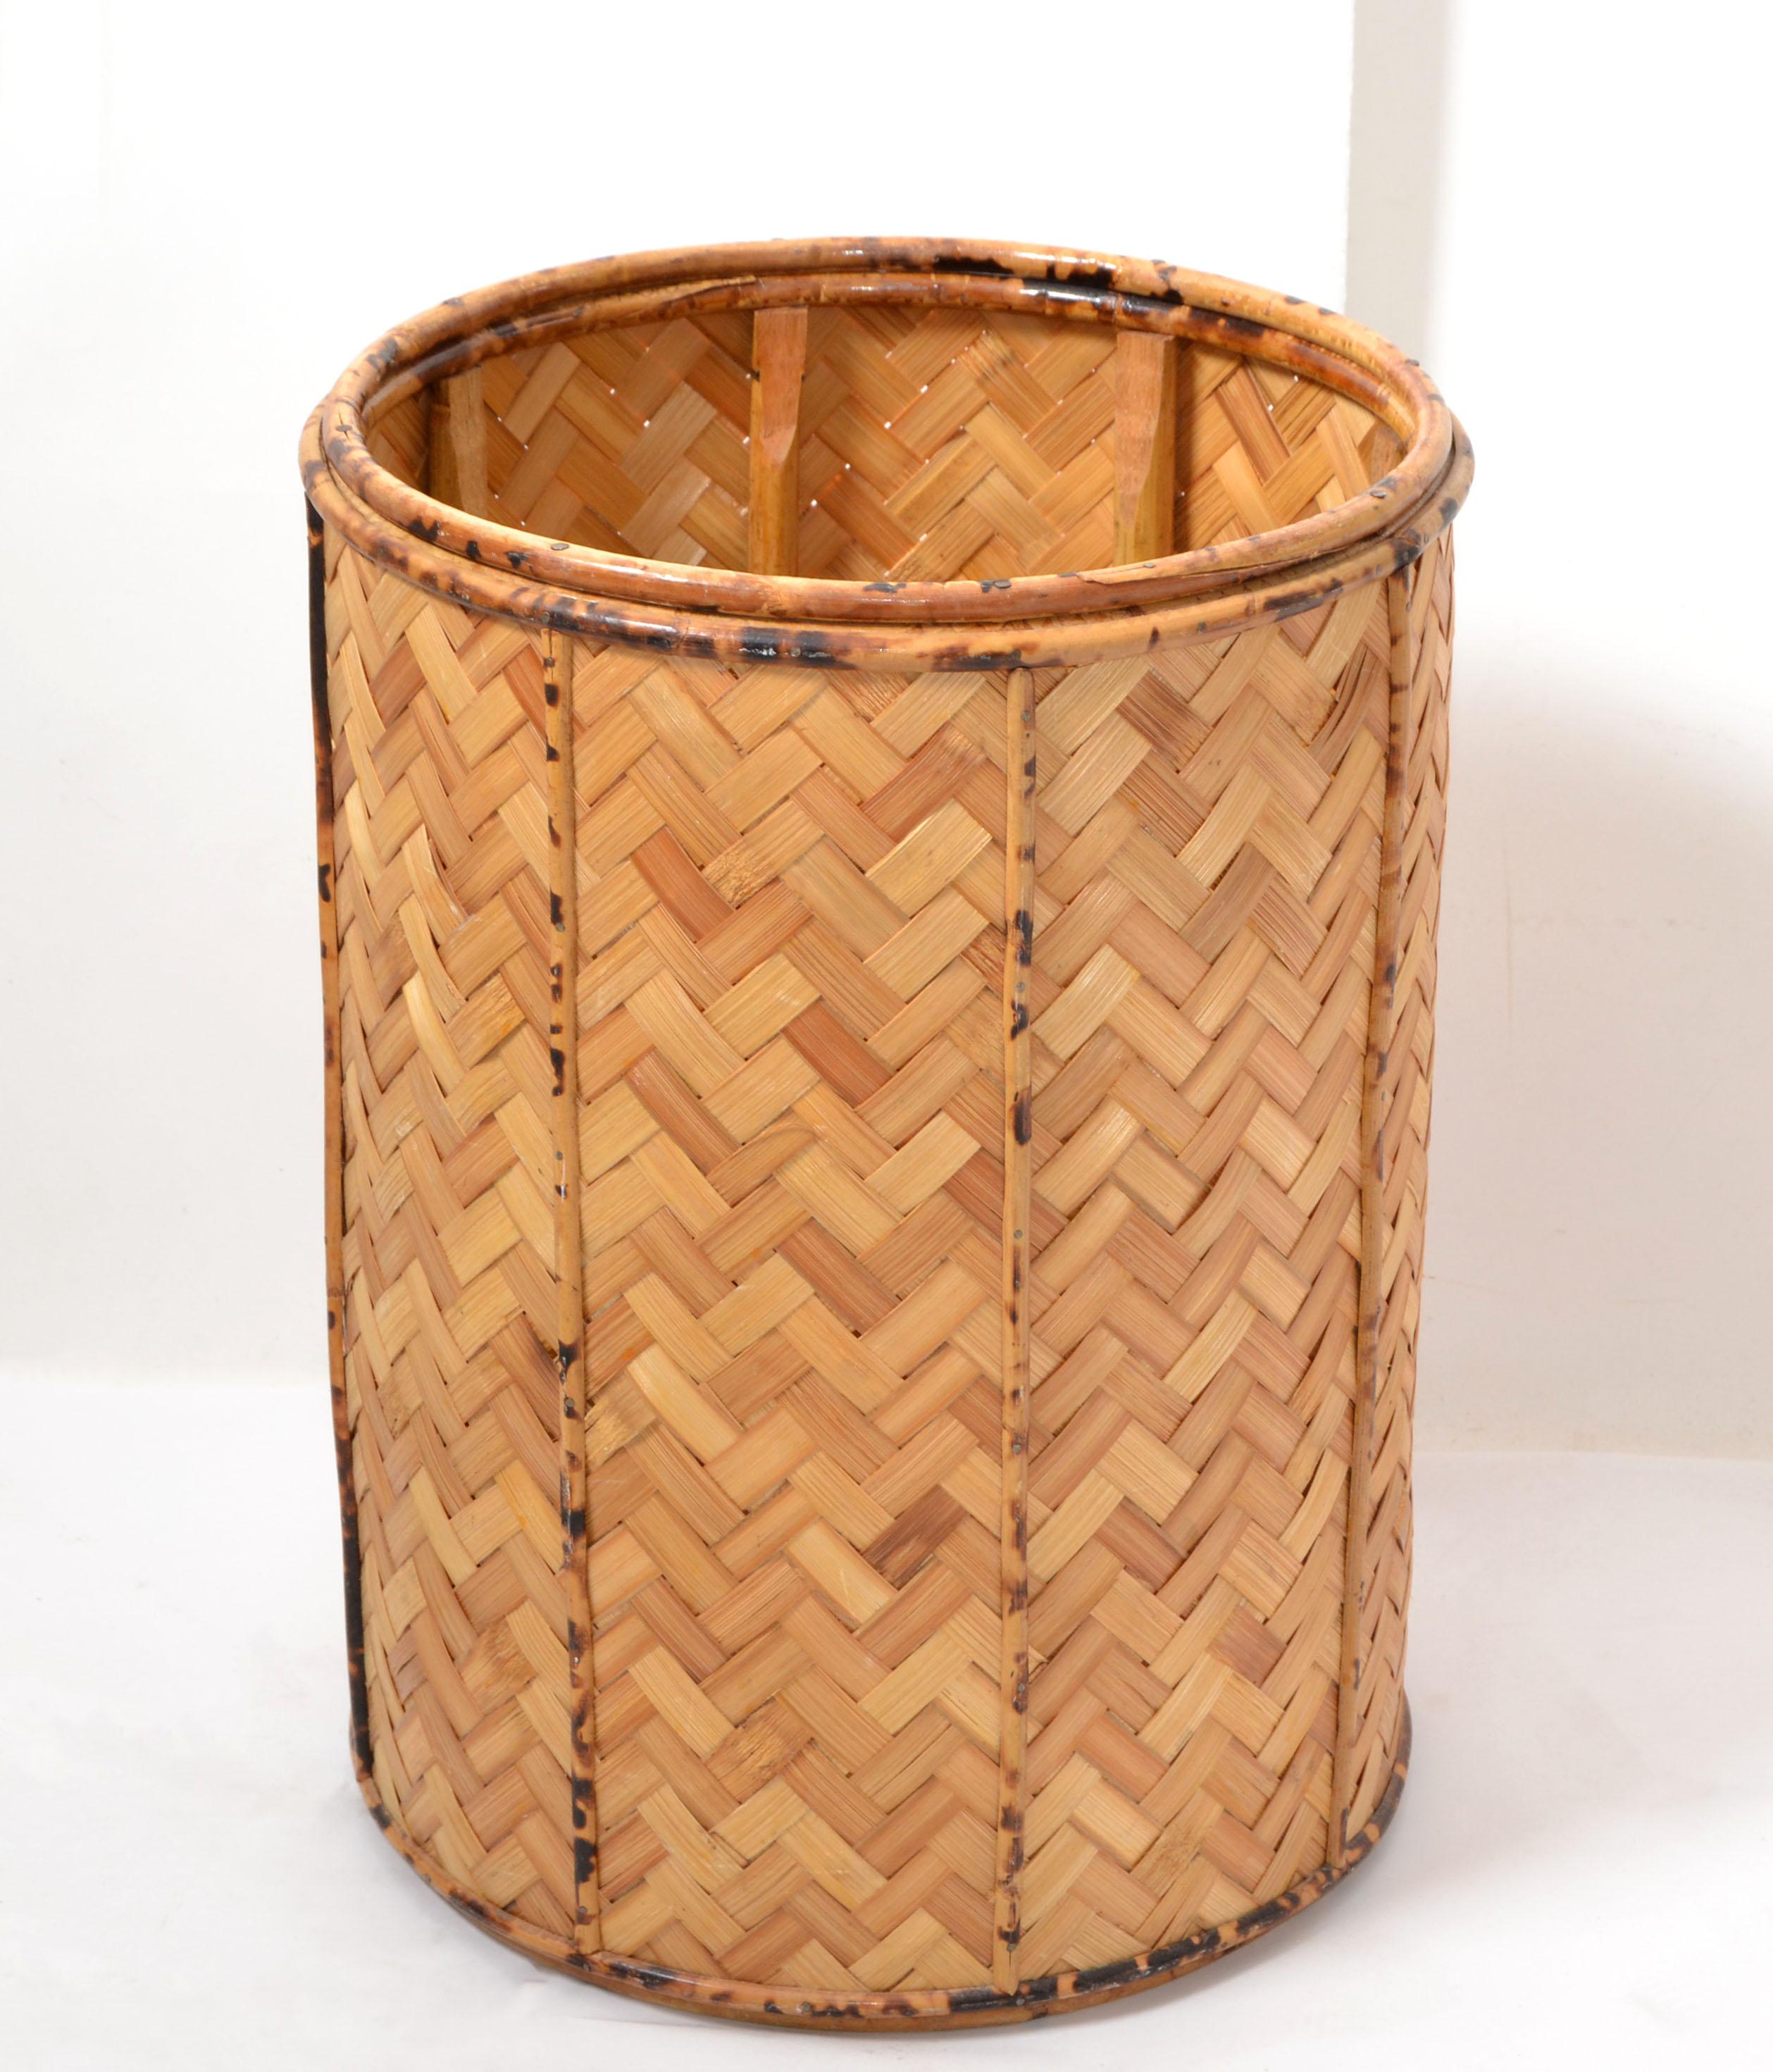 Vintage Lidded Basket Handmade Bamboo & Handwoven Rattan Hong Kong Asian Modern In Good Condition For Sale In Miami, FL